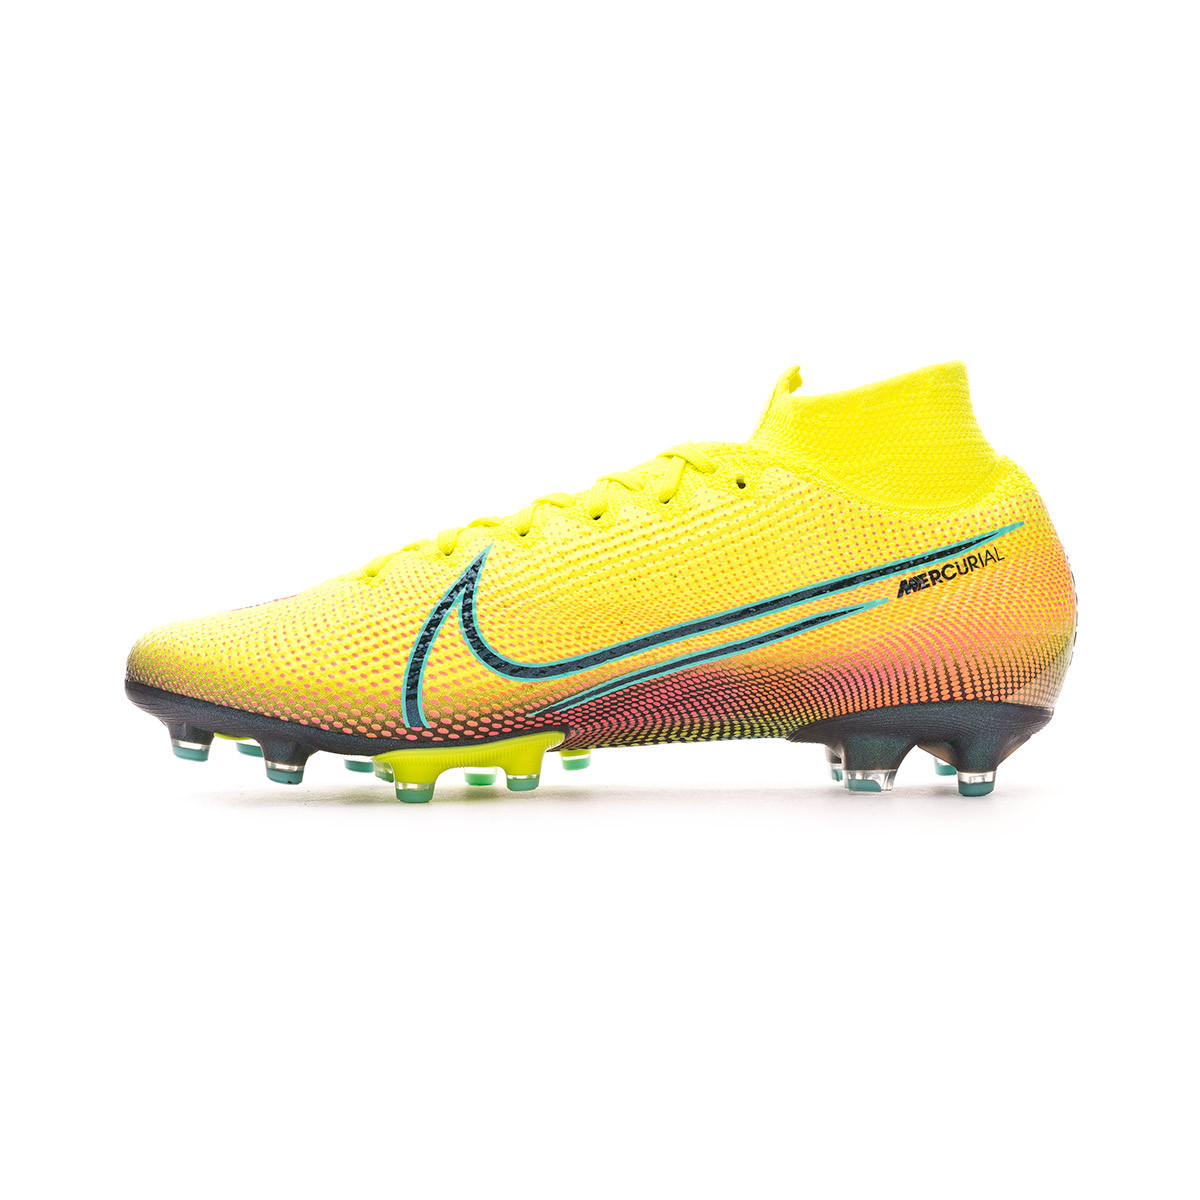 Nike Mercurial Superfly 7 Elite MDS FG children 's football boots